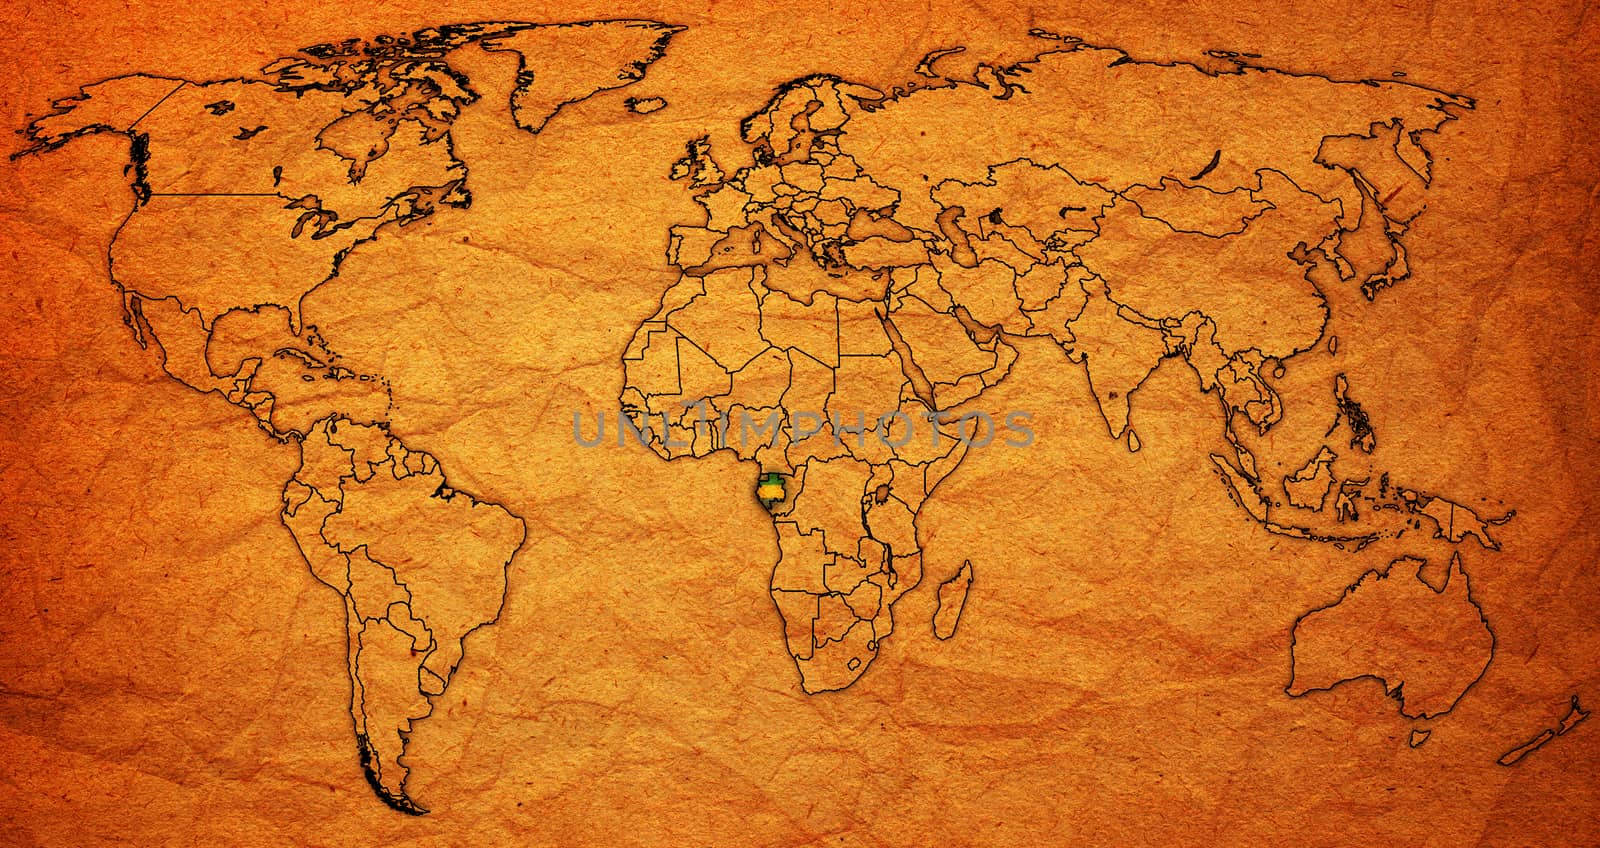 gabon territory on actual world map by michal812